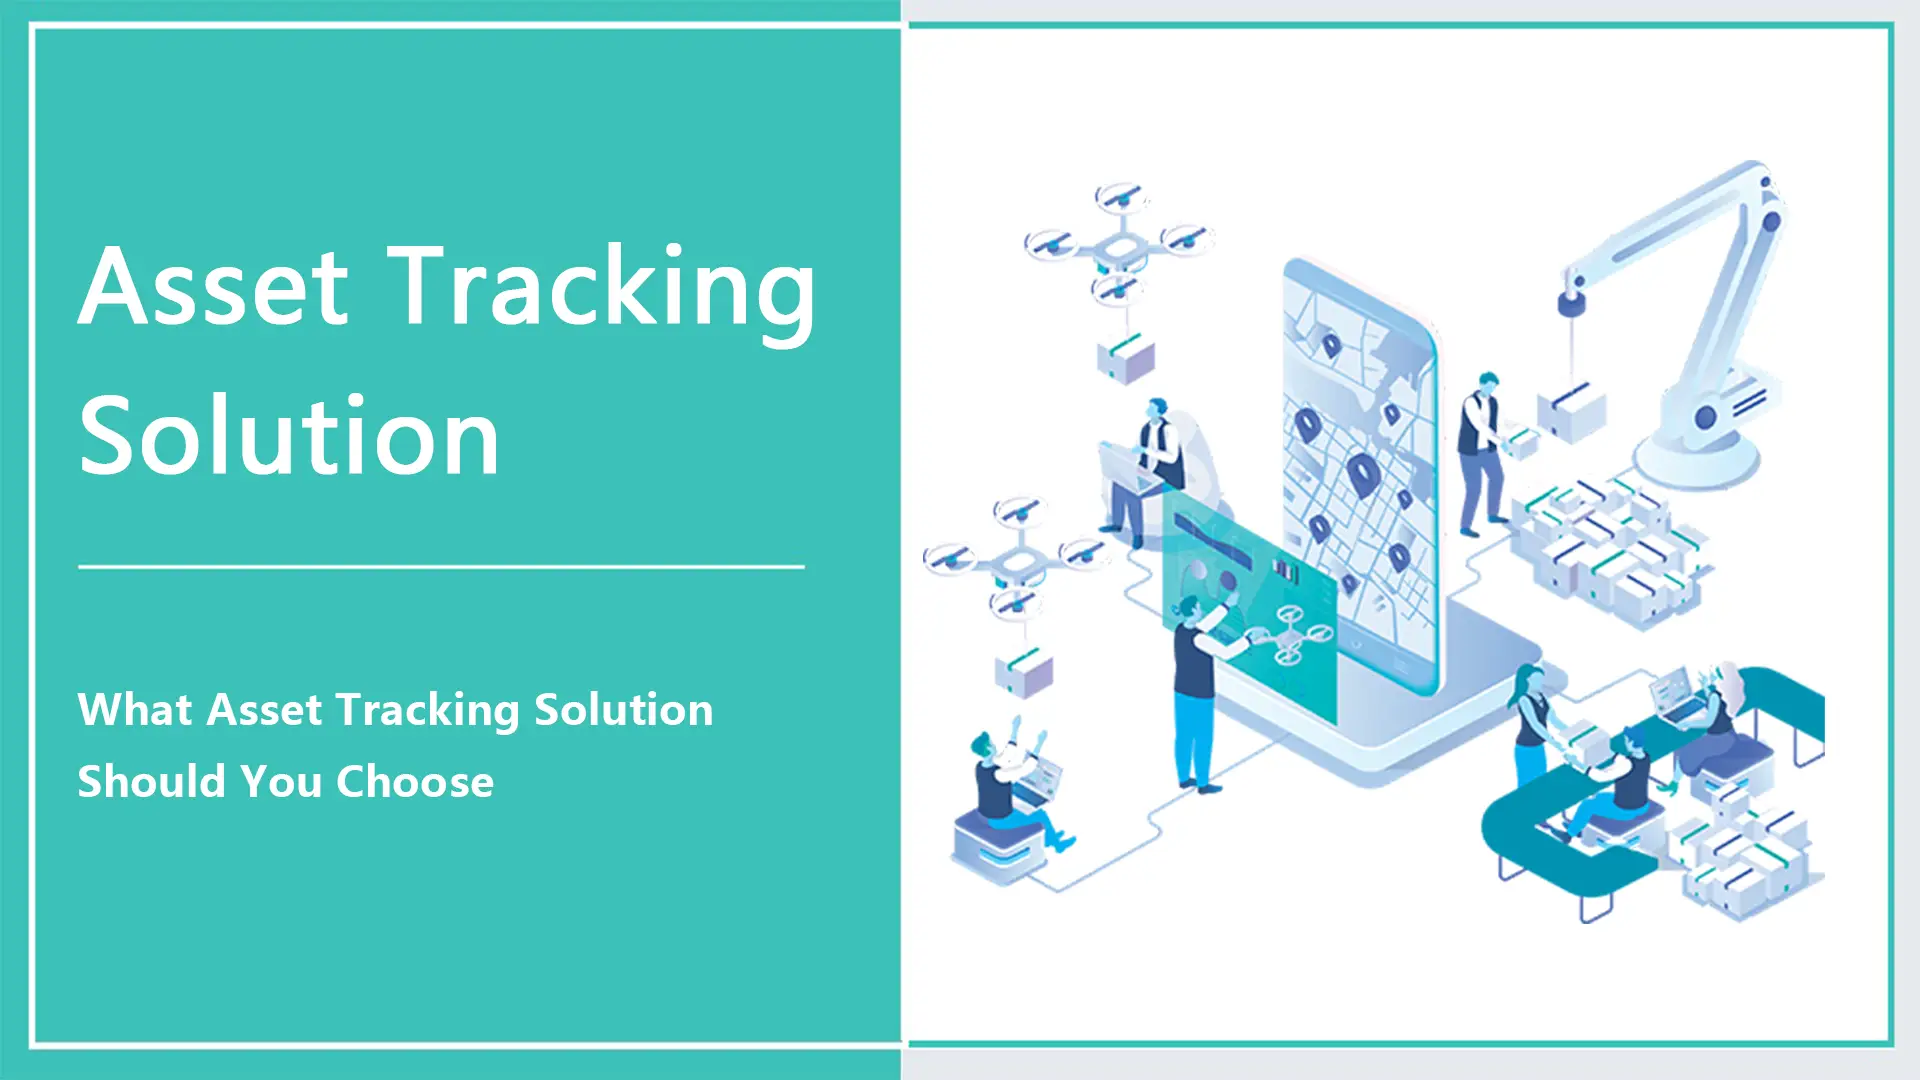 What Asset Tracking Solution Should You Choose